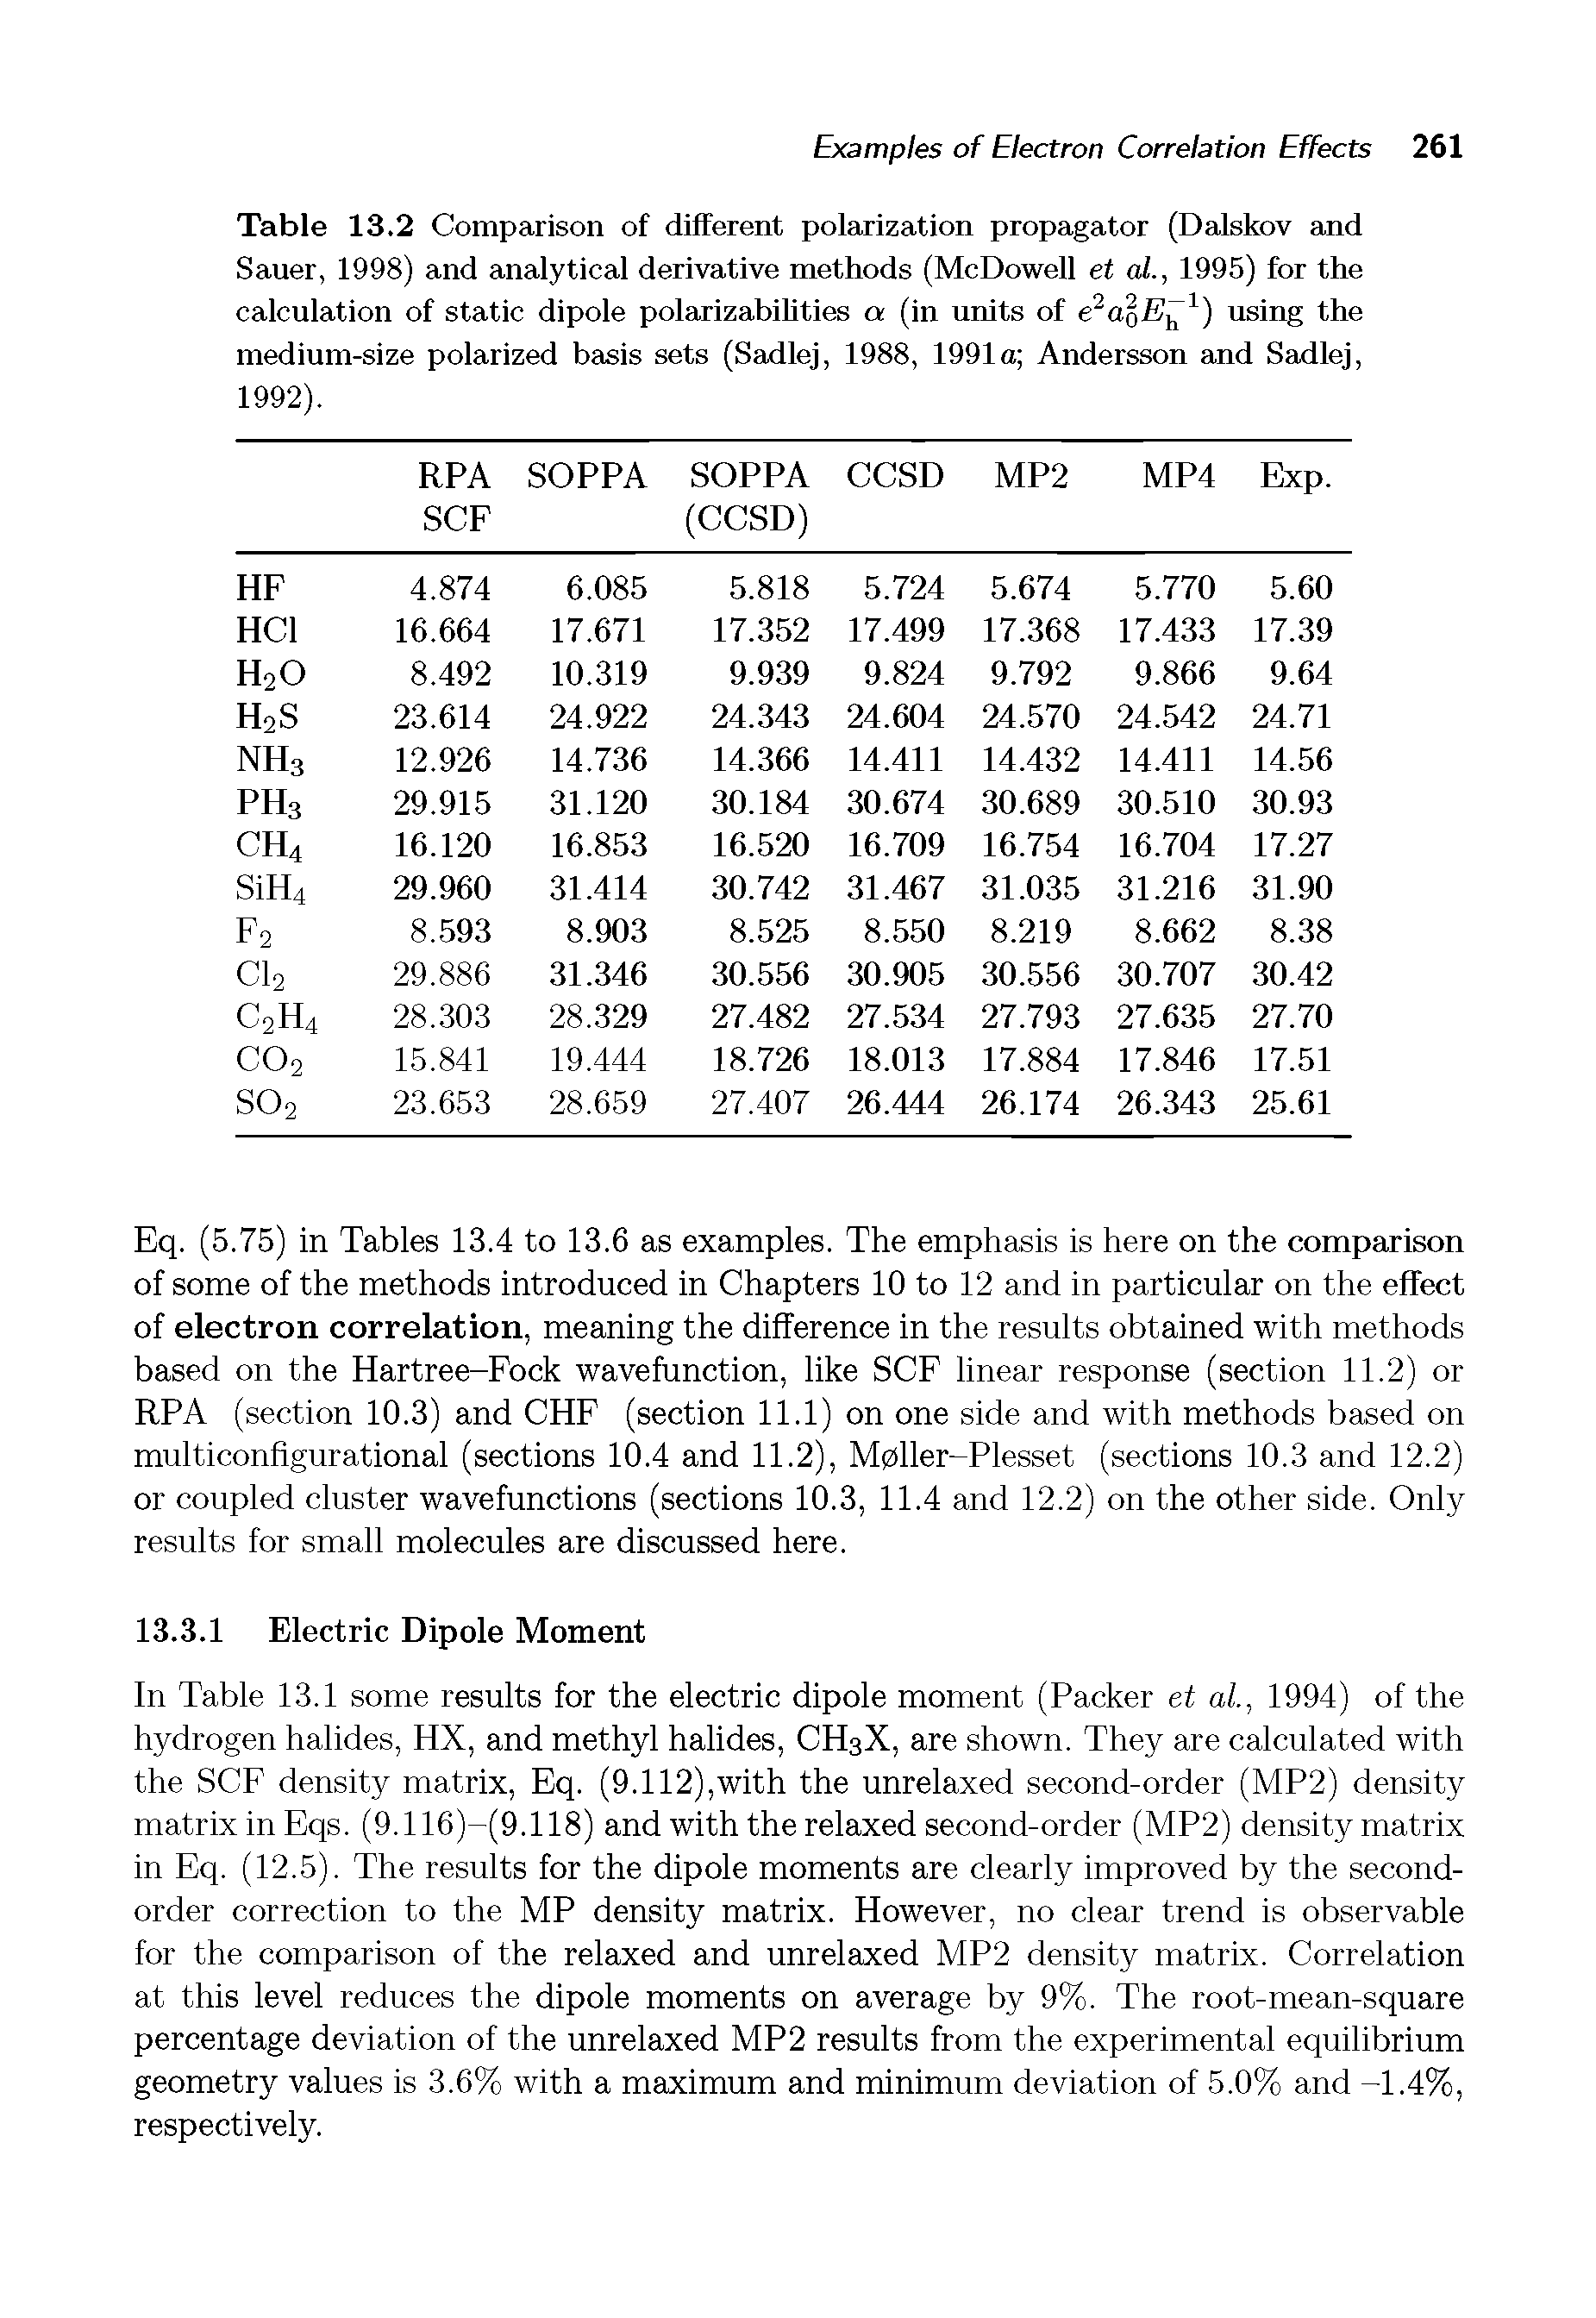 Table 13.2 Comparison of different polarization propagator (Dalskov and Sauer, 1998) and analytical derivative methods (McDowell et al., 1995) for the calculation of static dipole polarizabihties a (in units of e aoE ) using the medium-size polarized basis sets (Sadlej, 1988, 1991a Andersson and Sadlej,...